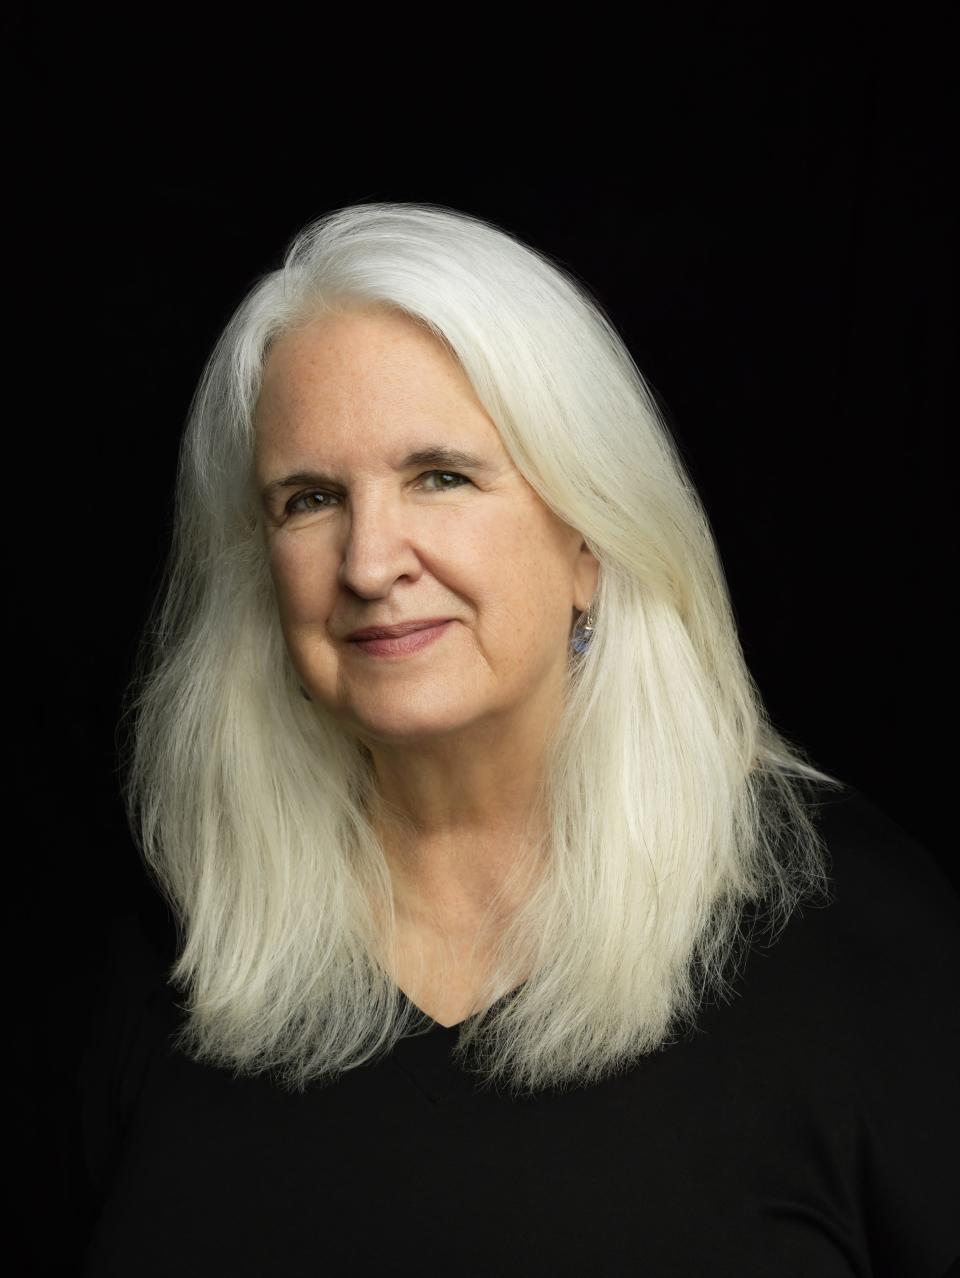 The writer Alice Elliott Dark, author of "In the Gloaming," "Think of England," and "Fellowship Point," a July 2022 publication of Simon & Schuster